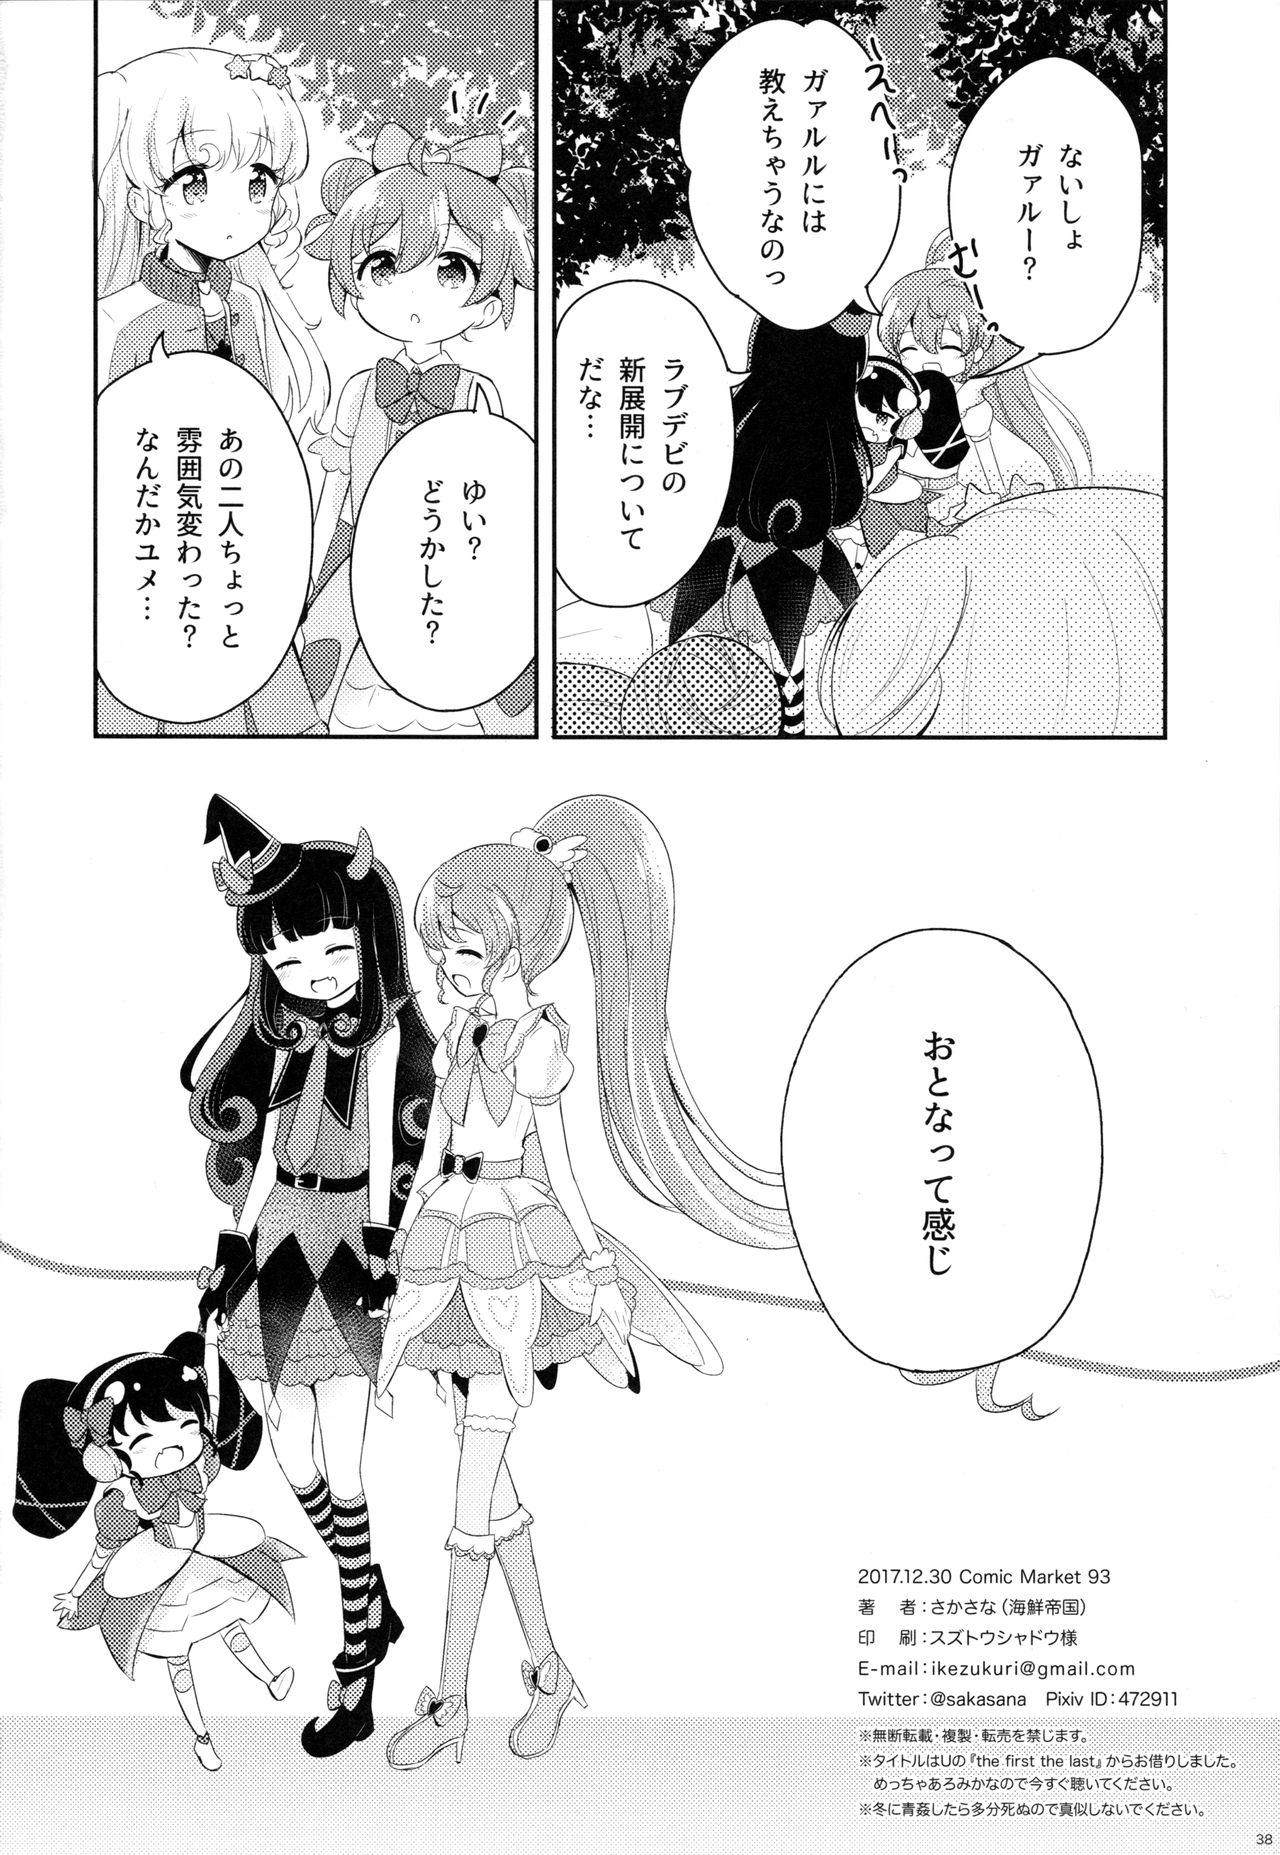 Sex Toy The First The Last. - Pripara Livesex - Page 40